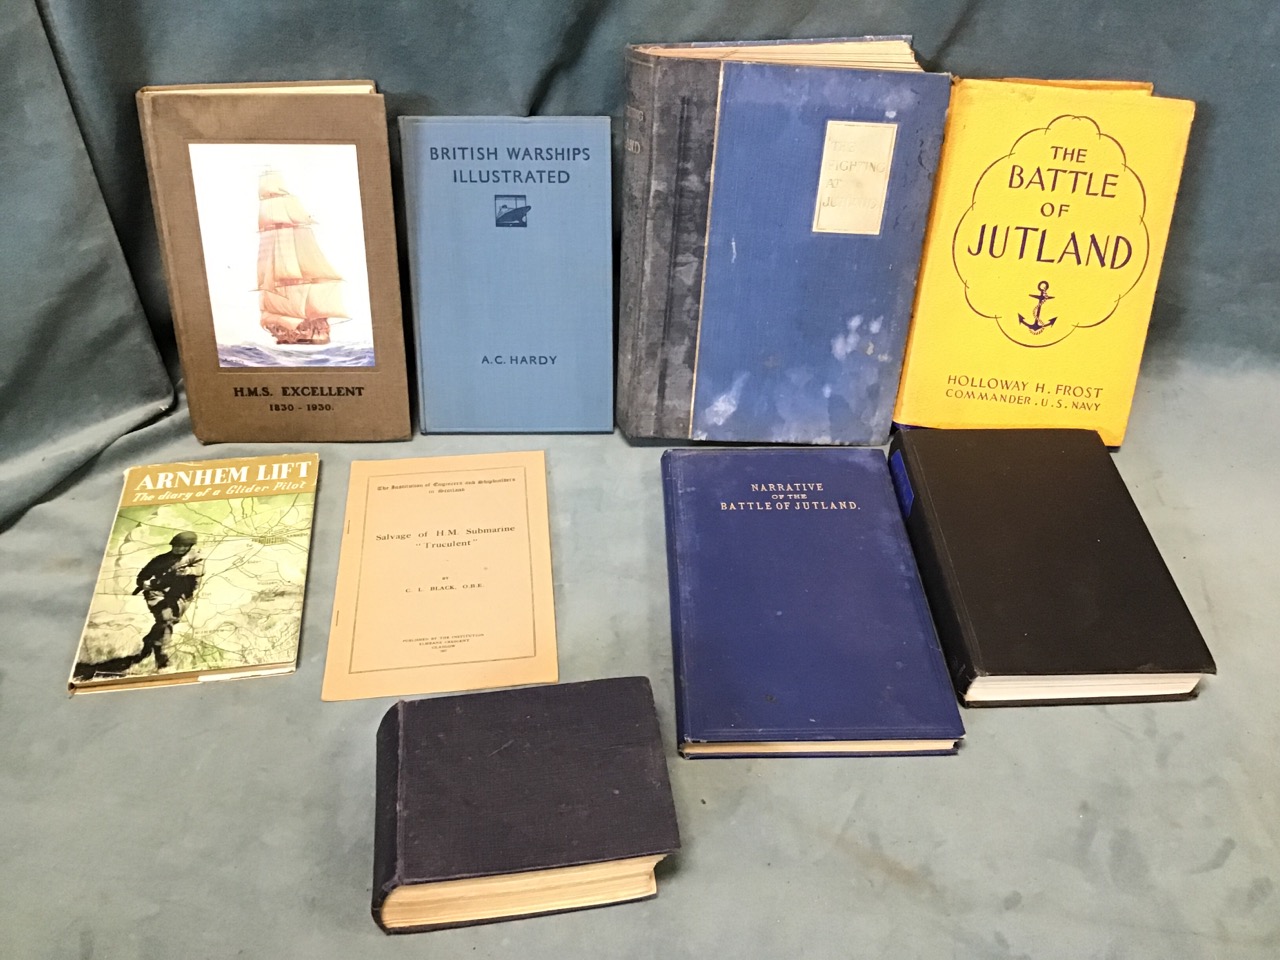 Naval books - three volumes on Jutland published in 1920, 1924 & 1936, all with illustrations, - Image 2 of 3